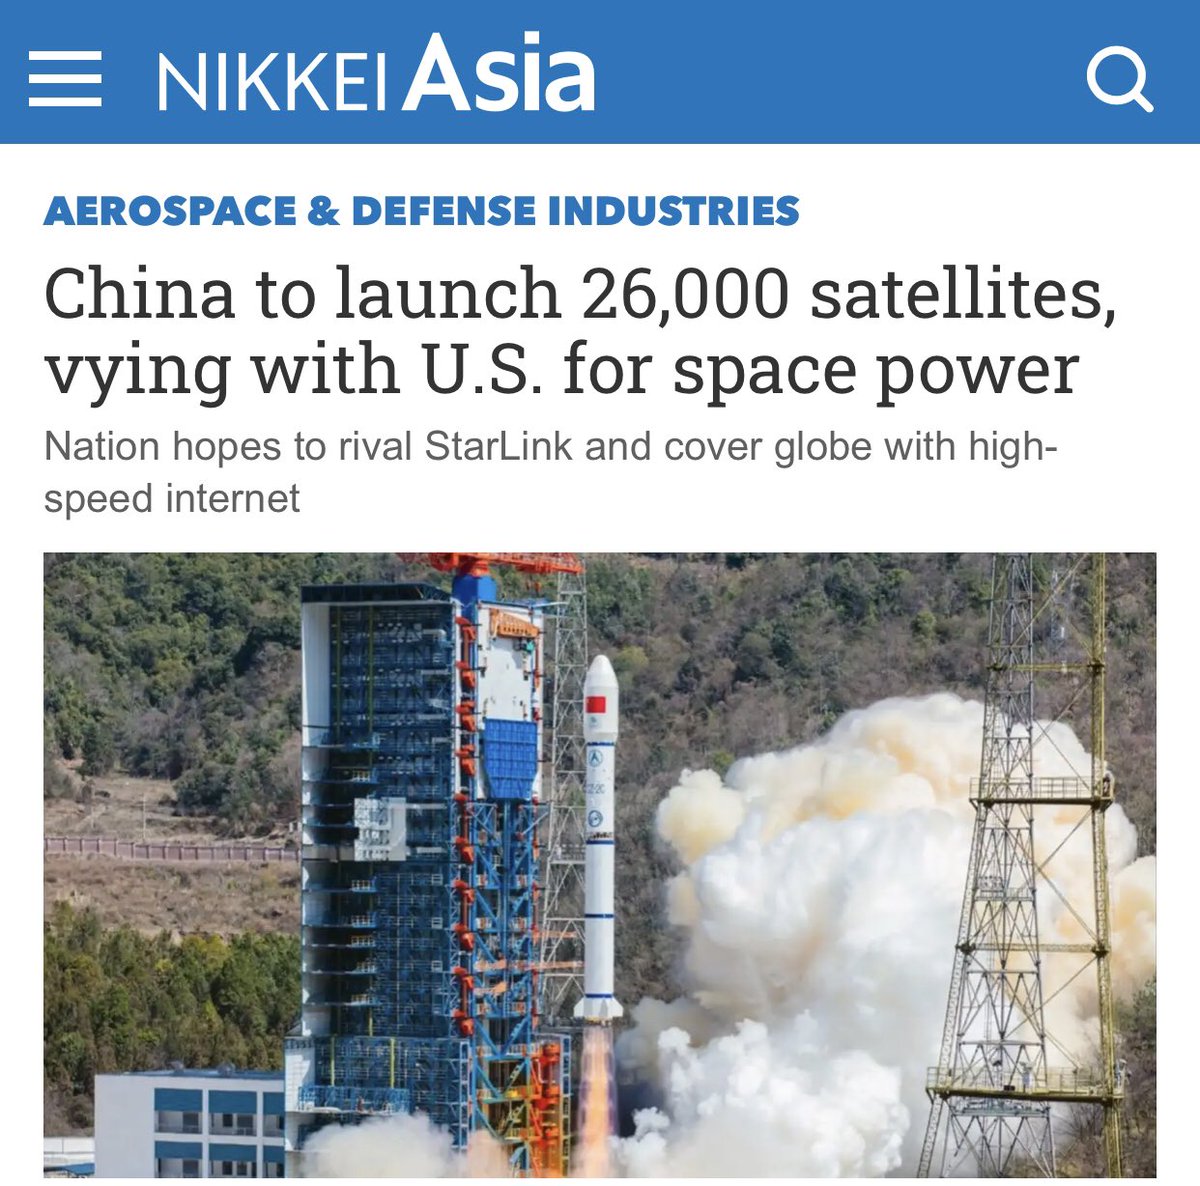 China will start building this year its own version of StarLink, a satellite internet constellation using low Earth orbit, with plans of launching some 26,000 satellites to cover the entire world led by state-run companies. A commercial spacecraft launch site is being constructed…